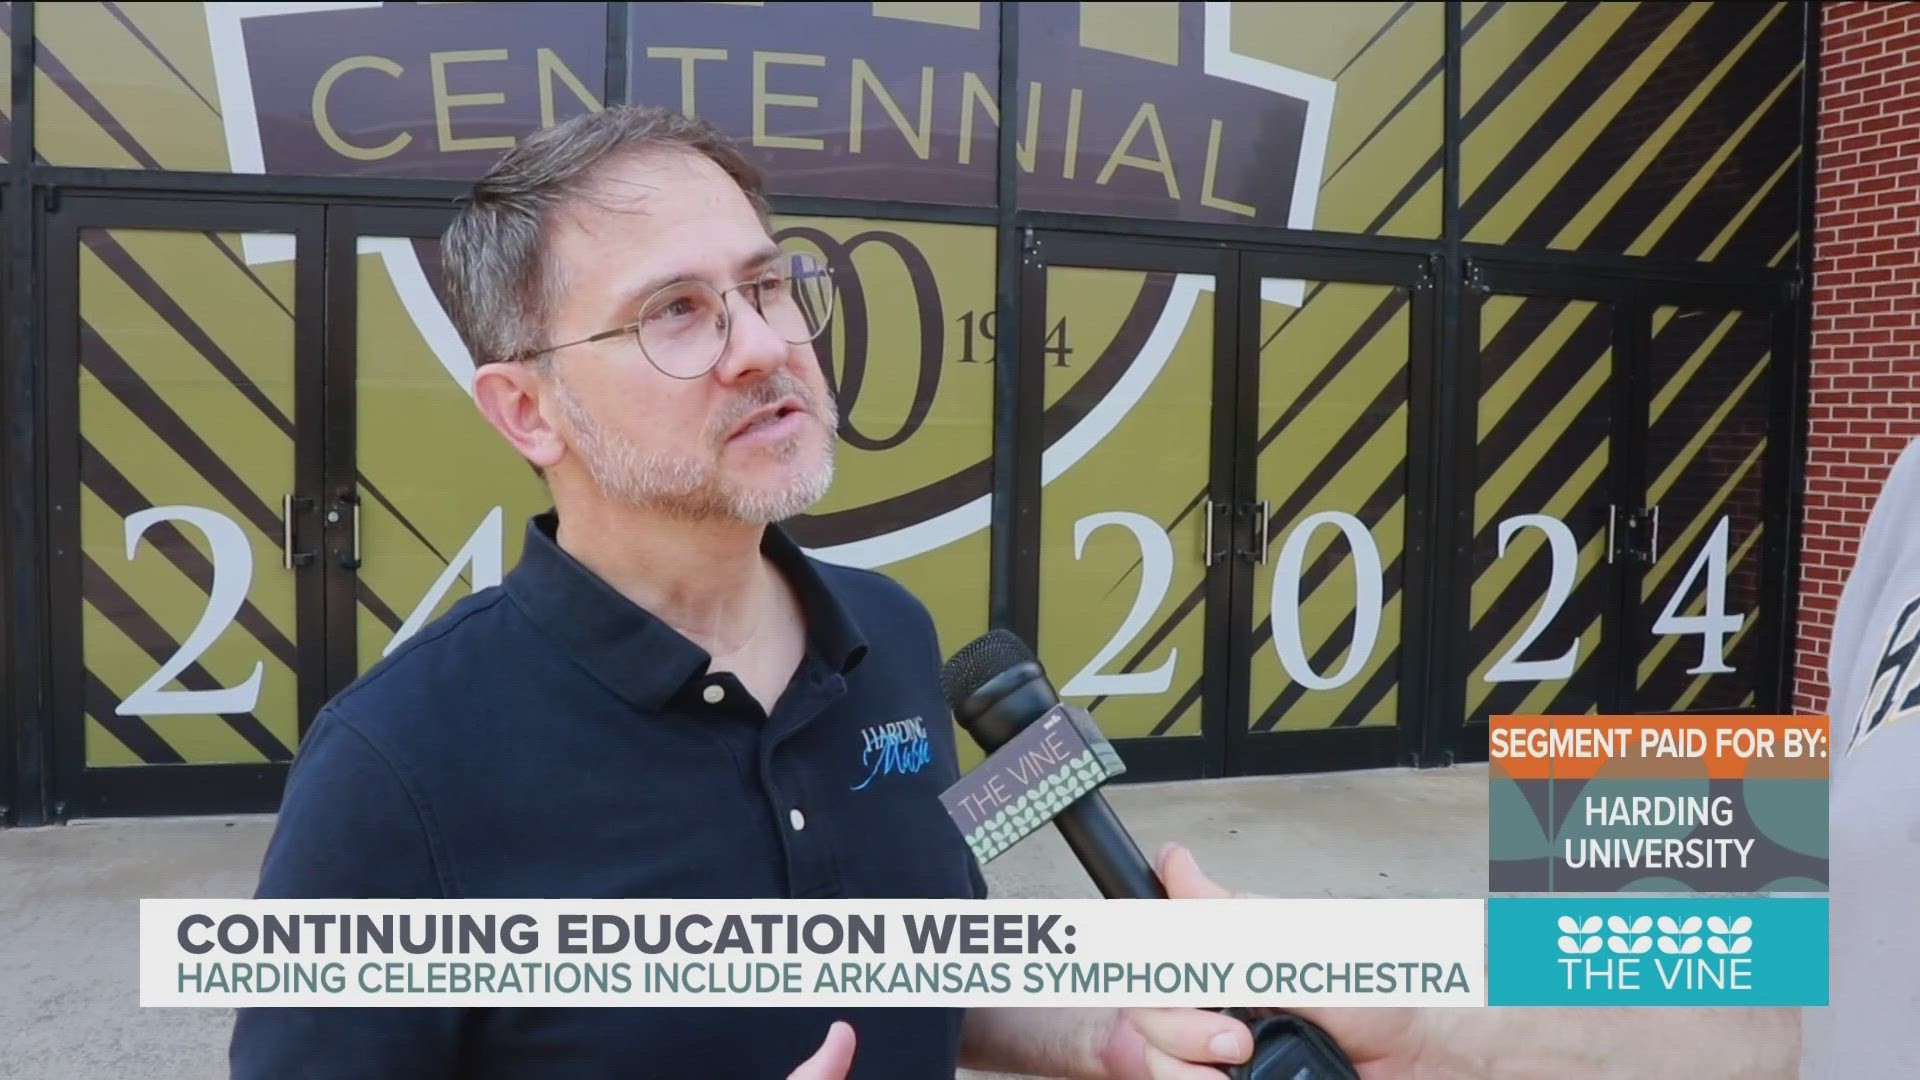 Jay Walls tells us about the special celebrations including the Arkansas Symphony Orchestra.